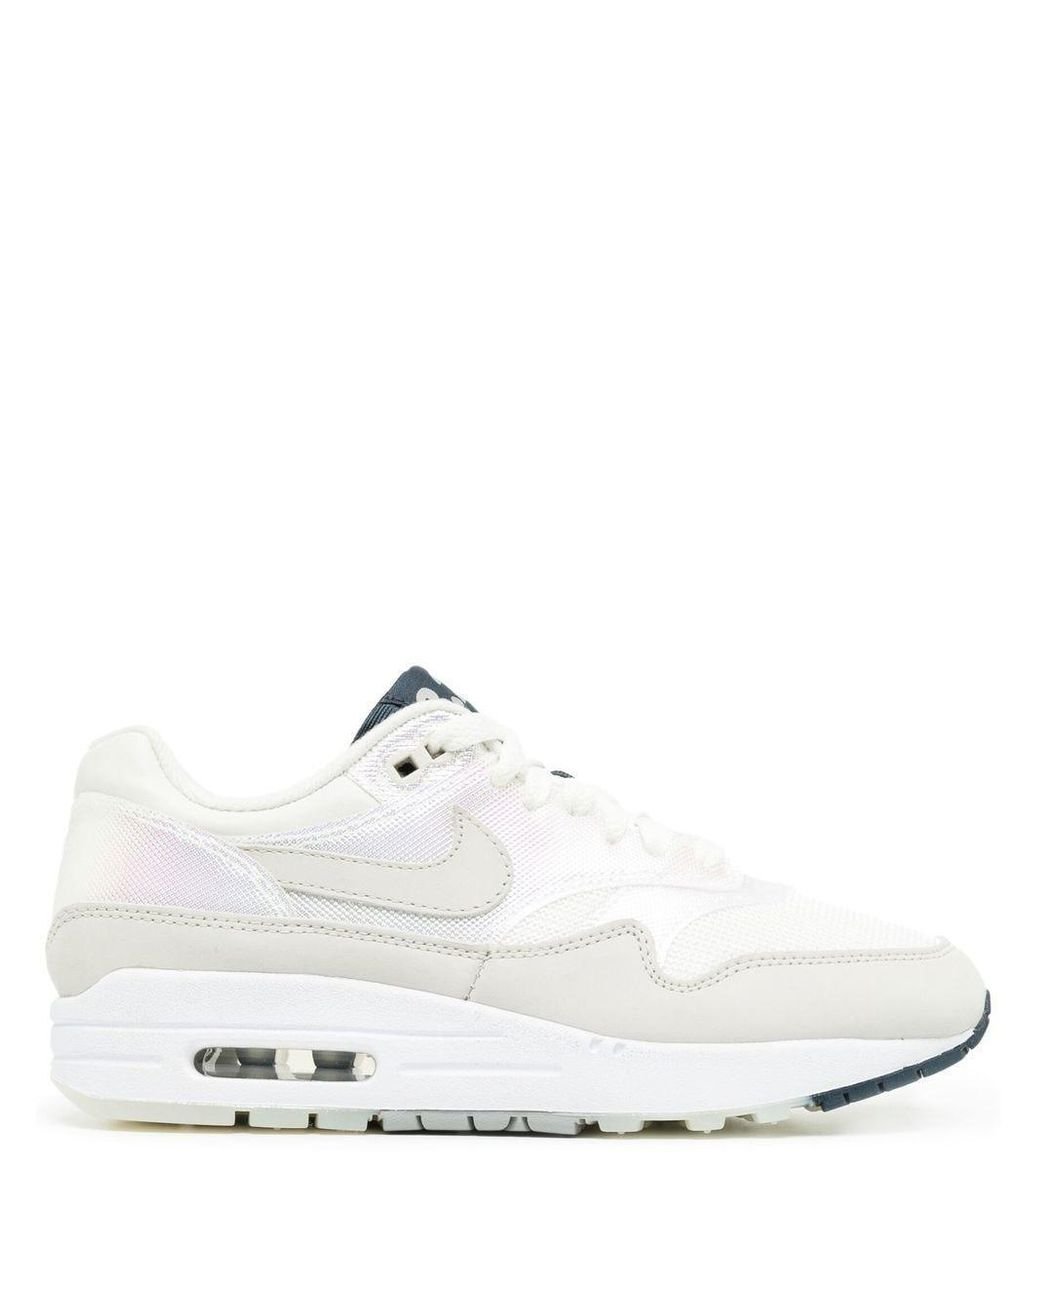 Nike Air Max 1 Sneakers in White | Lyst